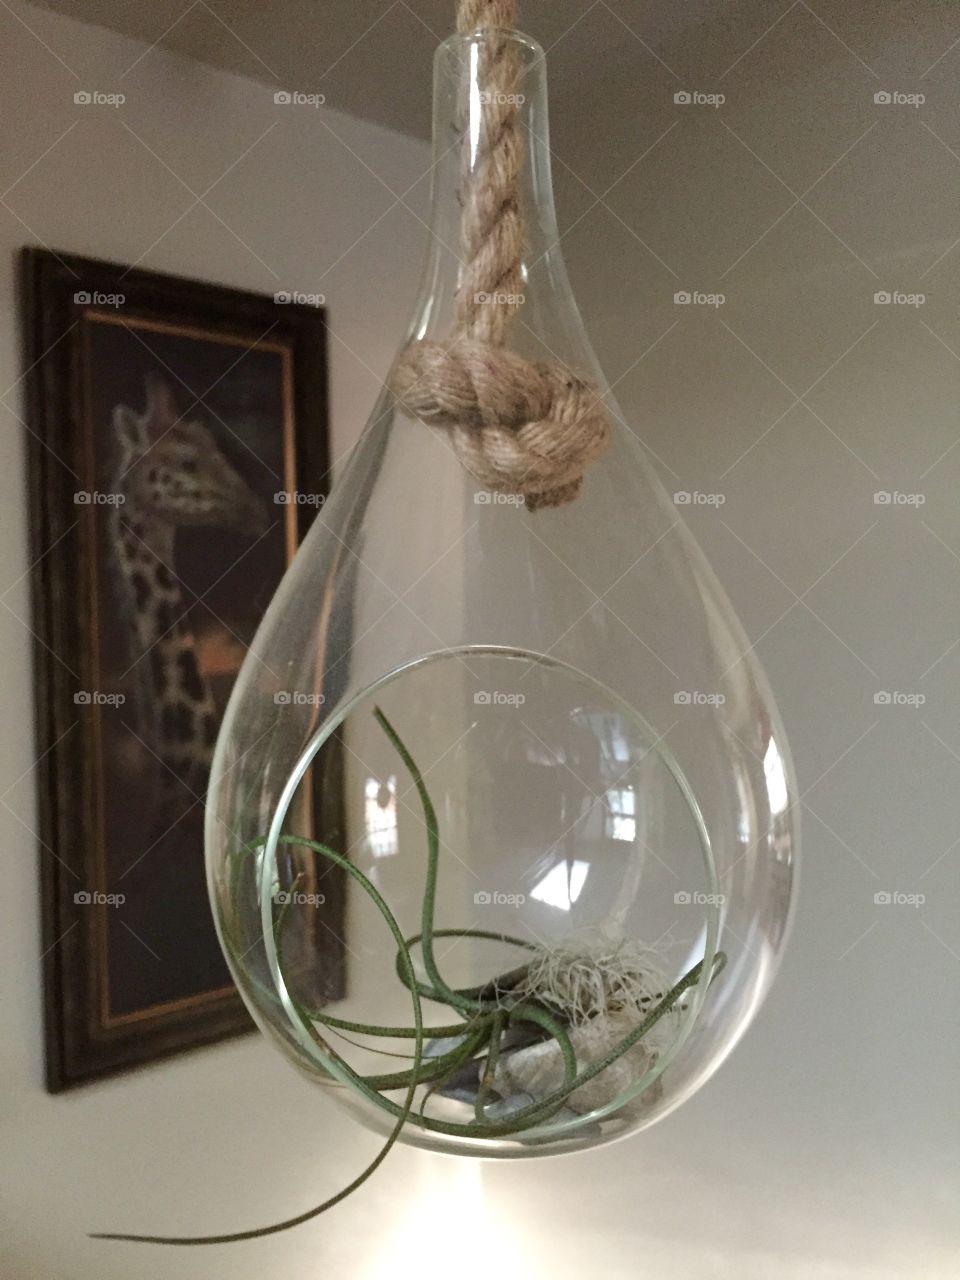 Air plant terrarium. Air plants are very amazing. Only requiring a weekly soak and a good air dry to sustain.